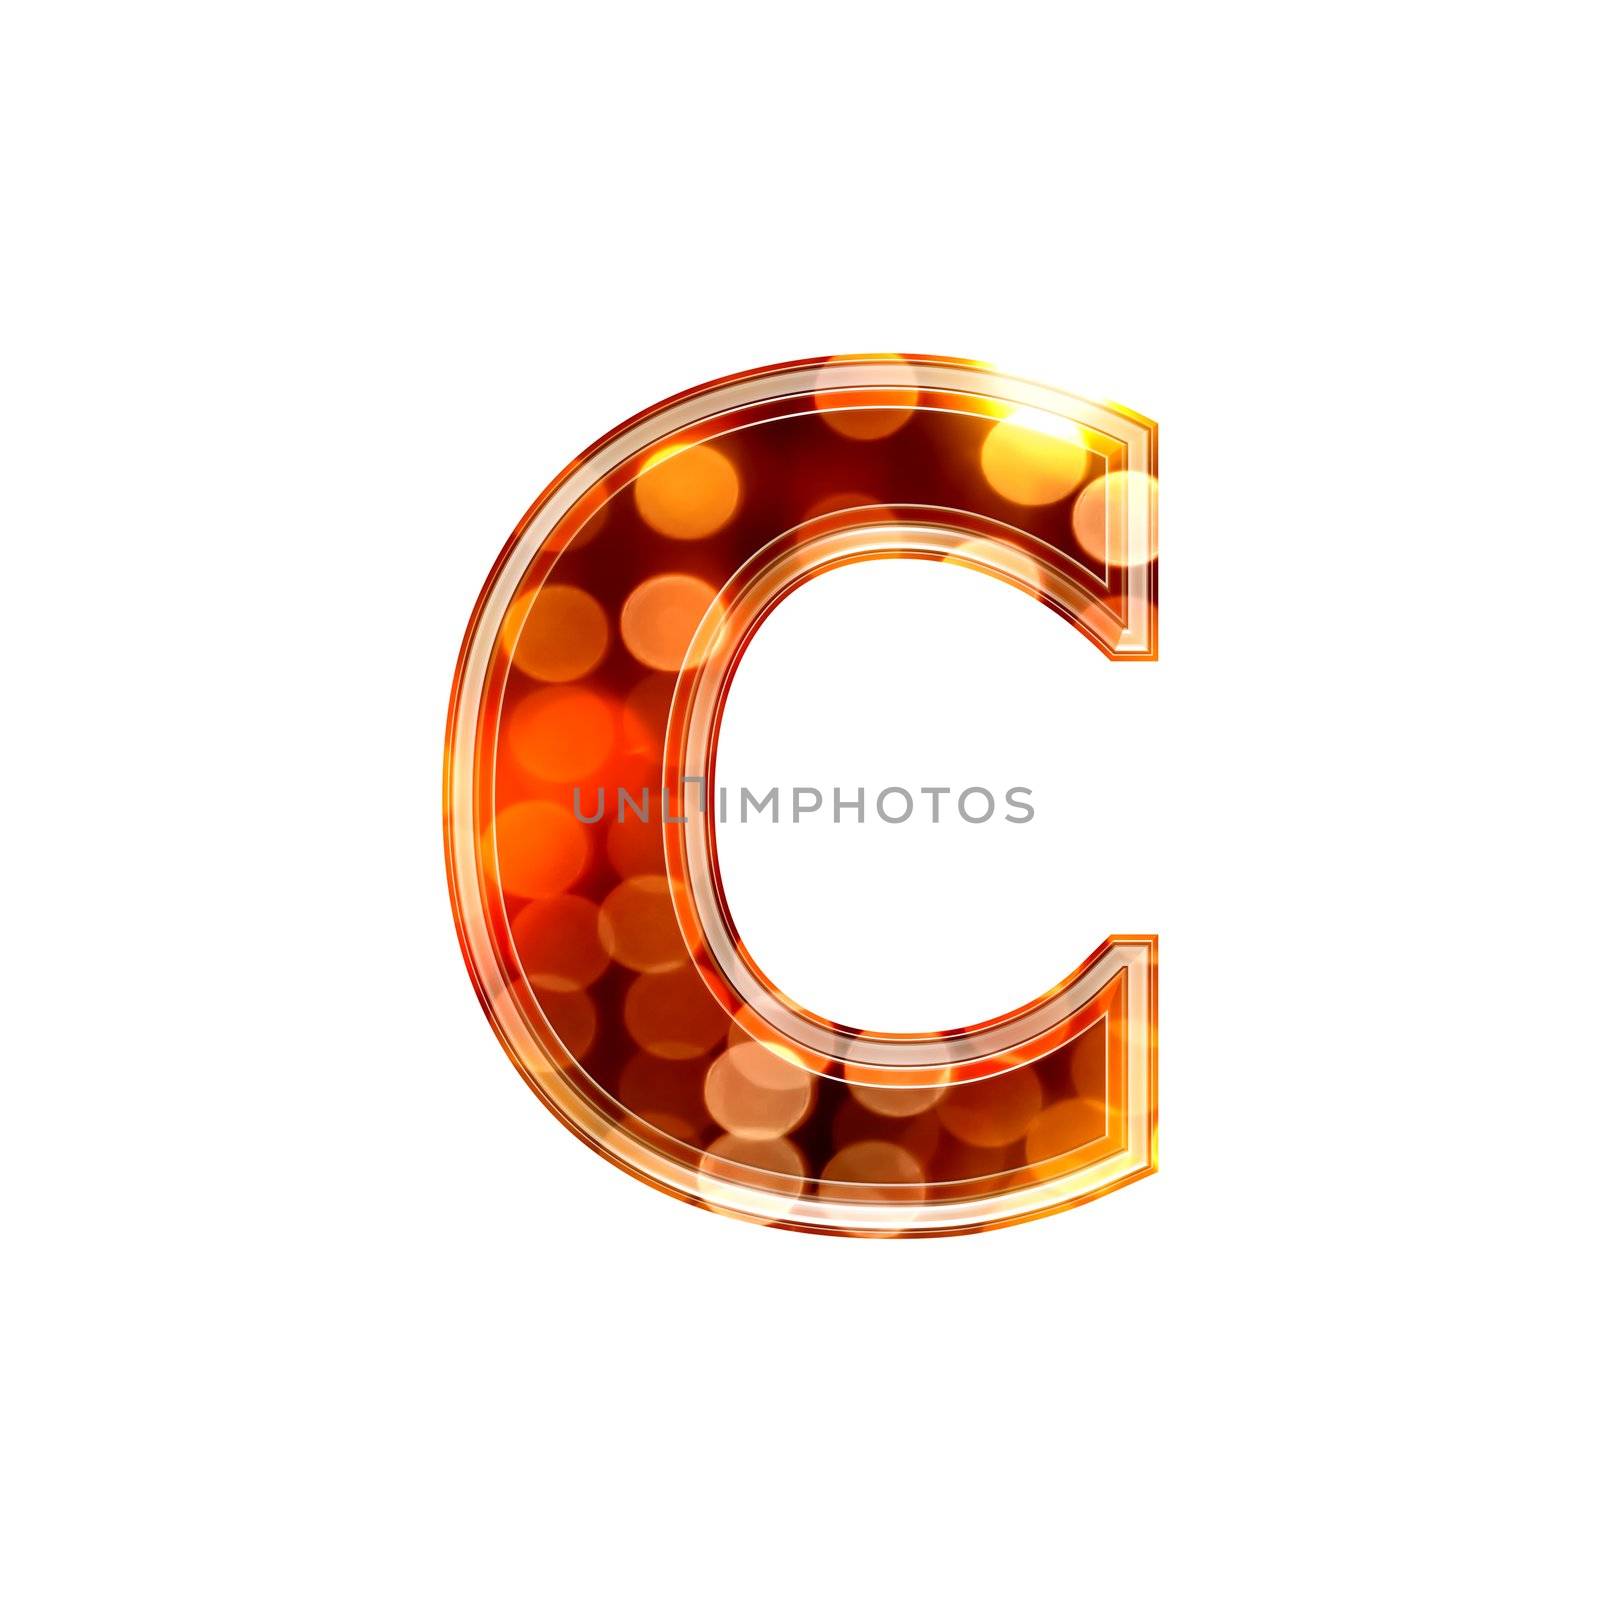 3d letter with glowing lights texture - c